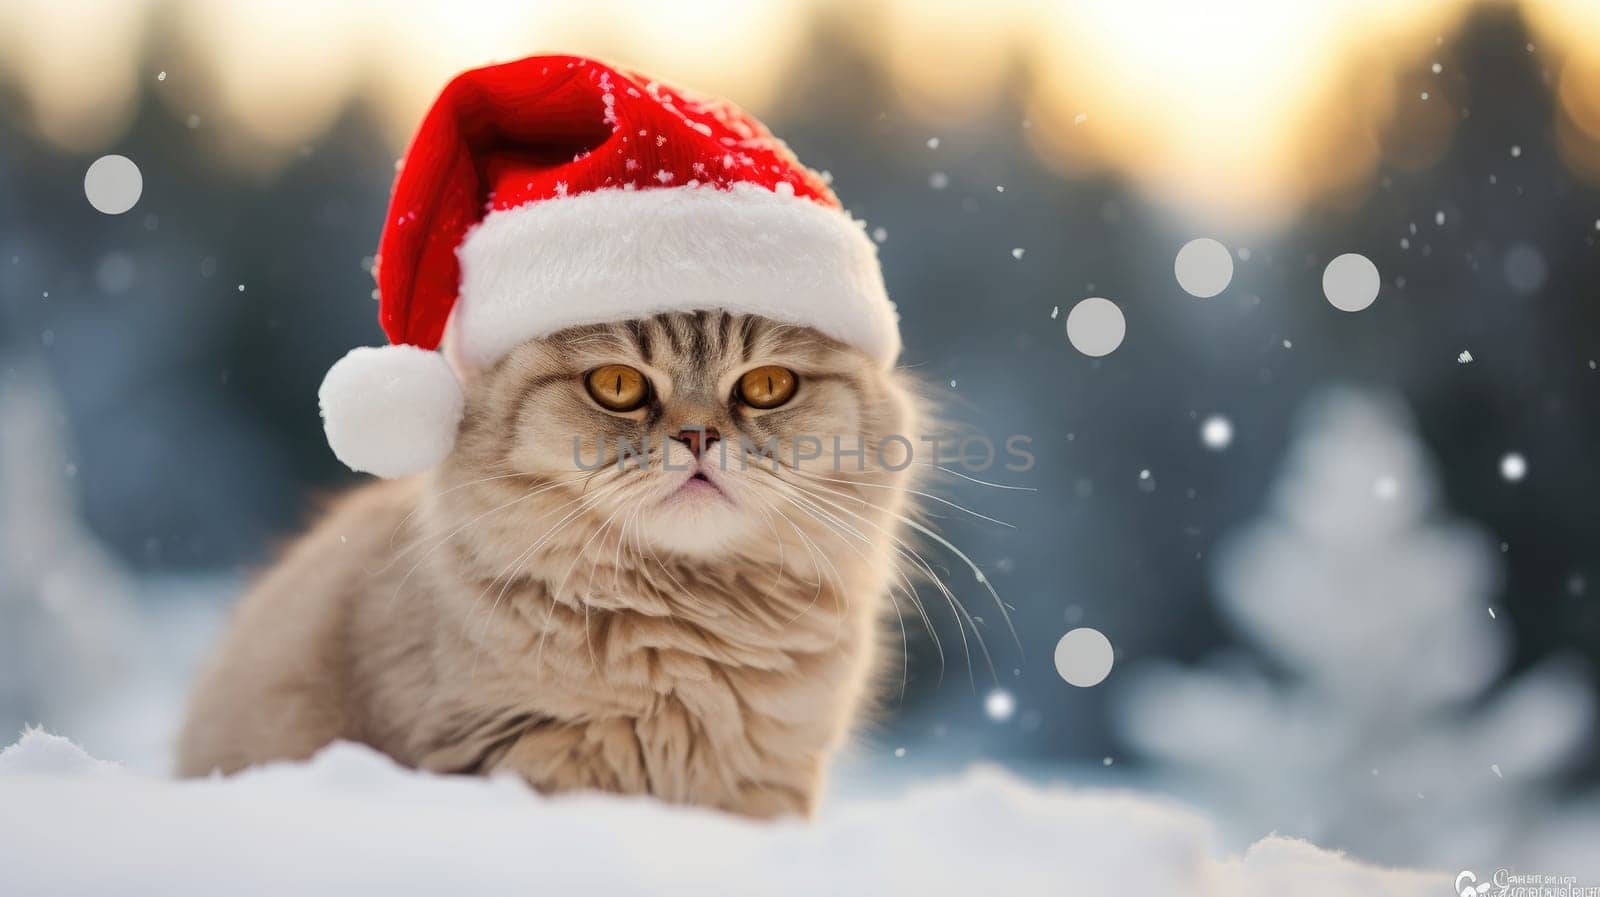 A festive cat in a red Santa Claus hat brings a festive mood for the New Year and Christmas holidays. The cat poses playfully, representing the joy of the season.